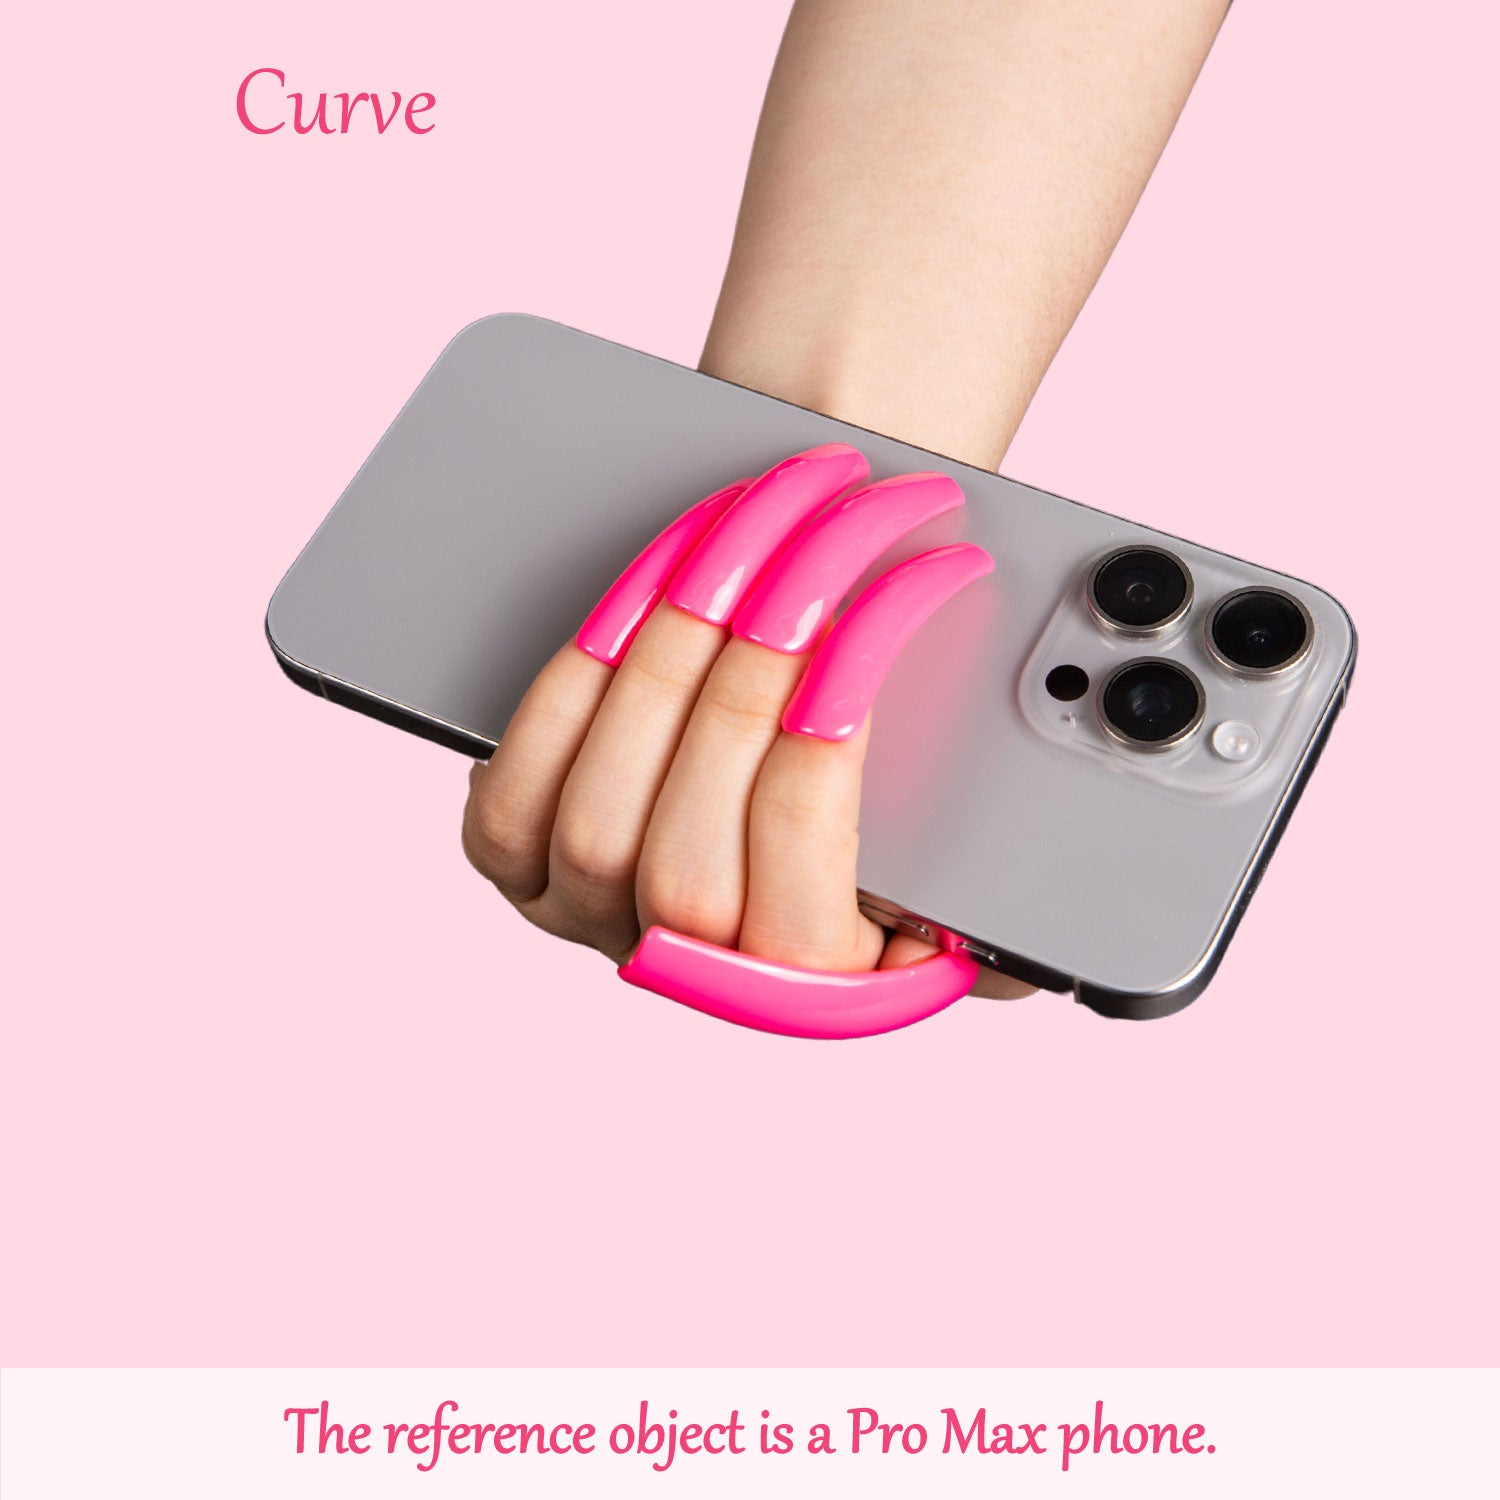 Hand with long, curved, bright pink press-on acrylic nails holding a Pro Max phone. Text 'Curve' at the top and 'The reference object is a Pro Max phone' at the bottom. Pastel pink background.